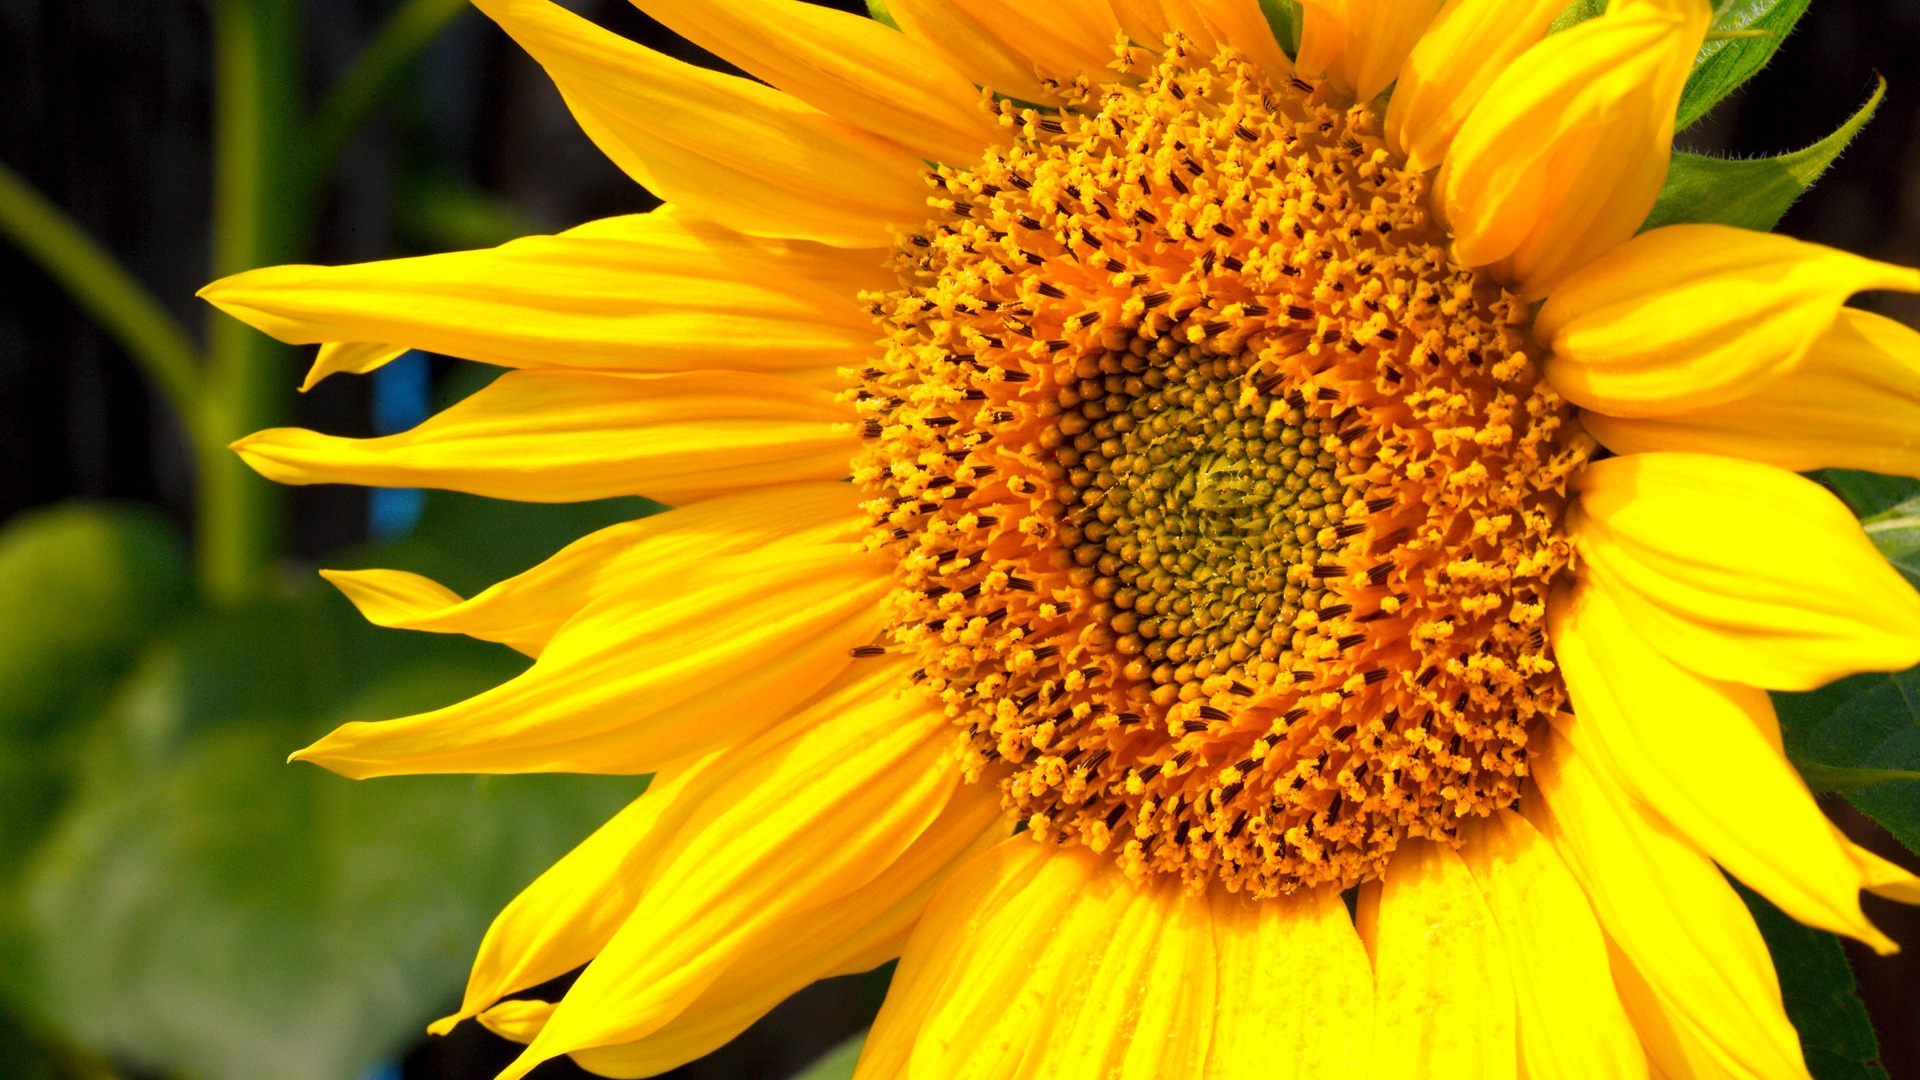 Sunny sunflower photo HD Wallpapers #37 - 1920x1080